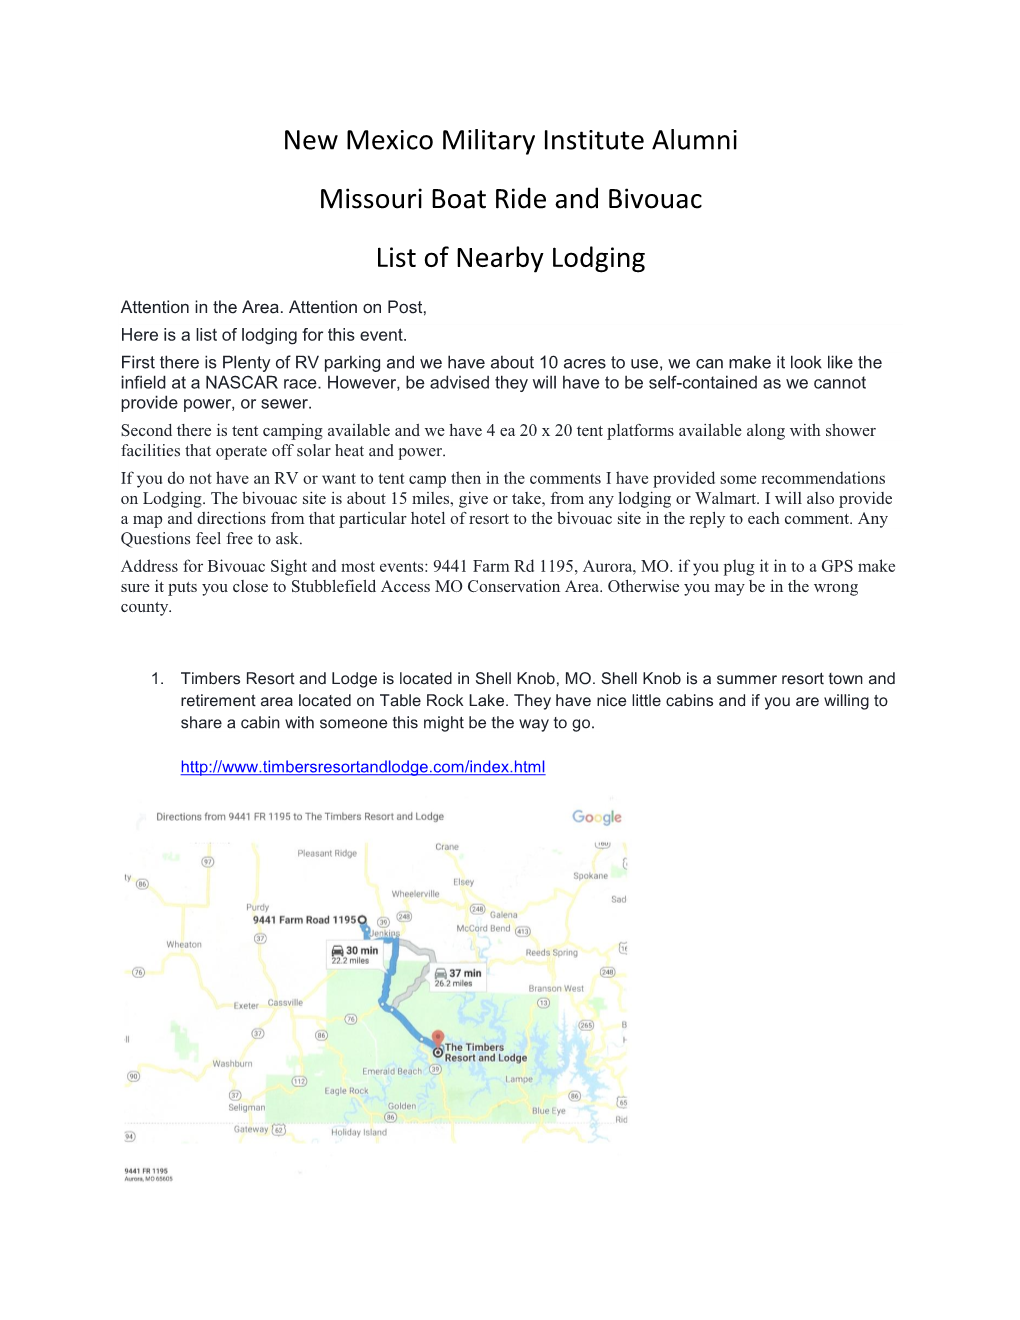 New Mexico Military Institute Alumni Missouri Boat Ride and Bivouac List of Nearby Lodging